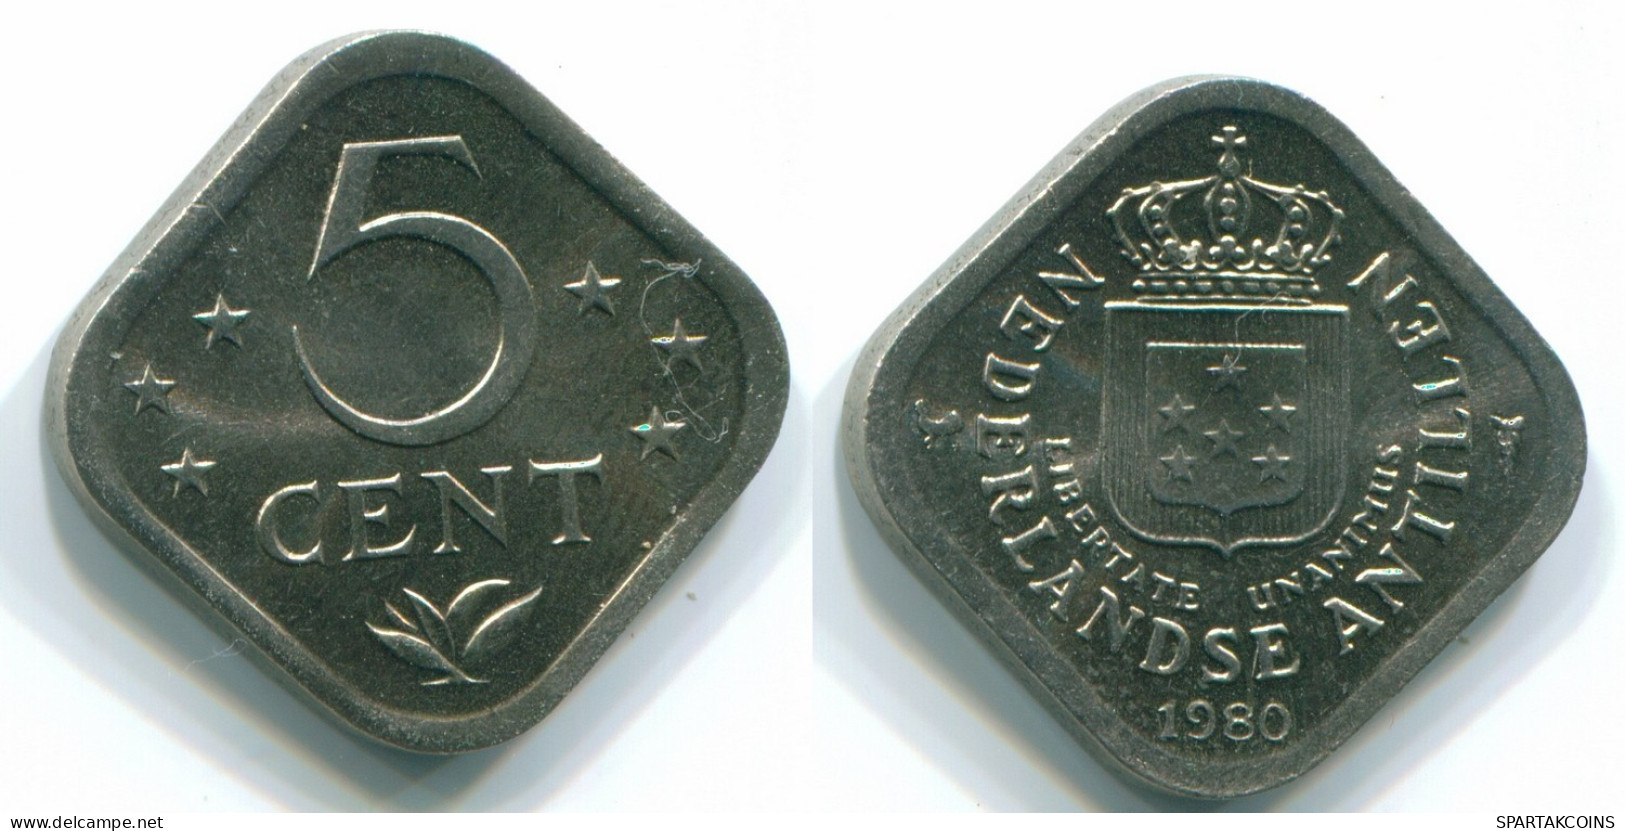 5 CENTS 1980 NETHERLANDS ANTILLES Nickel Colonial Coin #S12320.U.A - Netherlands Antilles